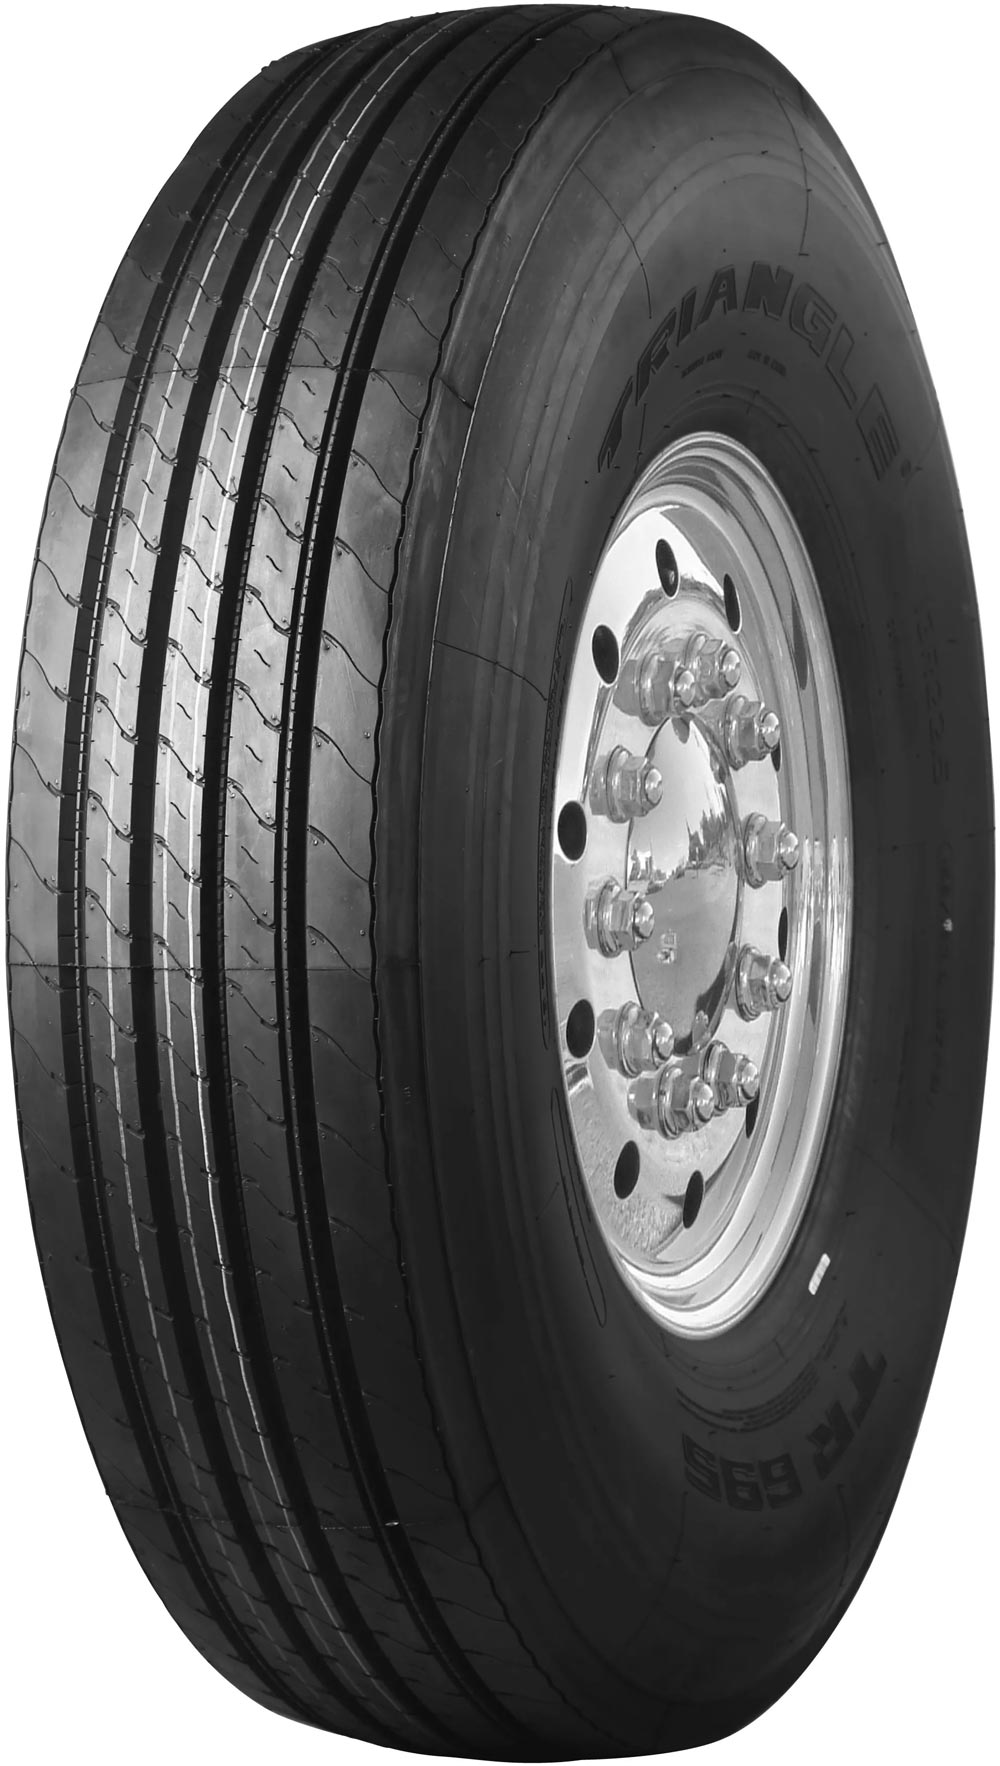 product_type-heavy_tires Triangle TR695 16PR 11 R22.5 146M